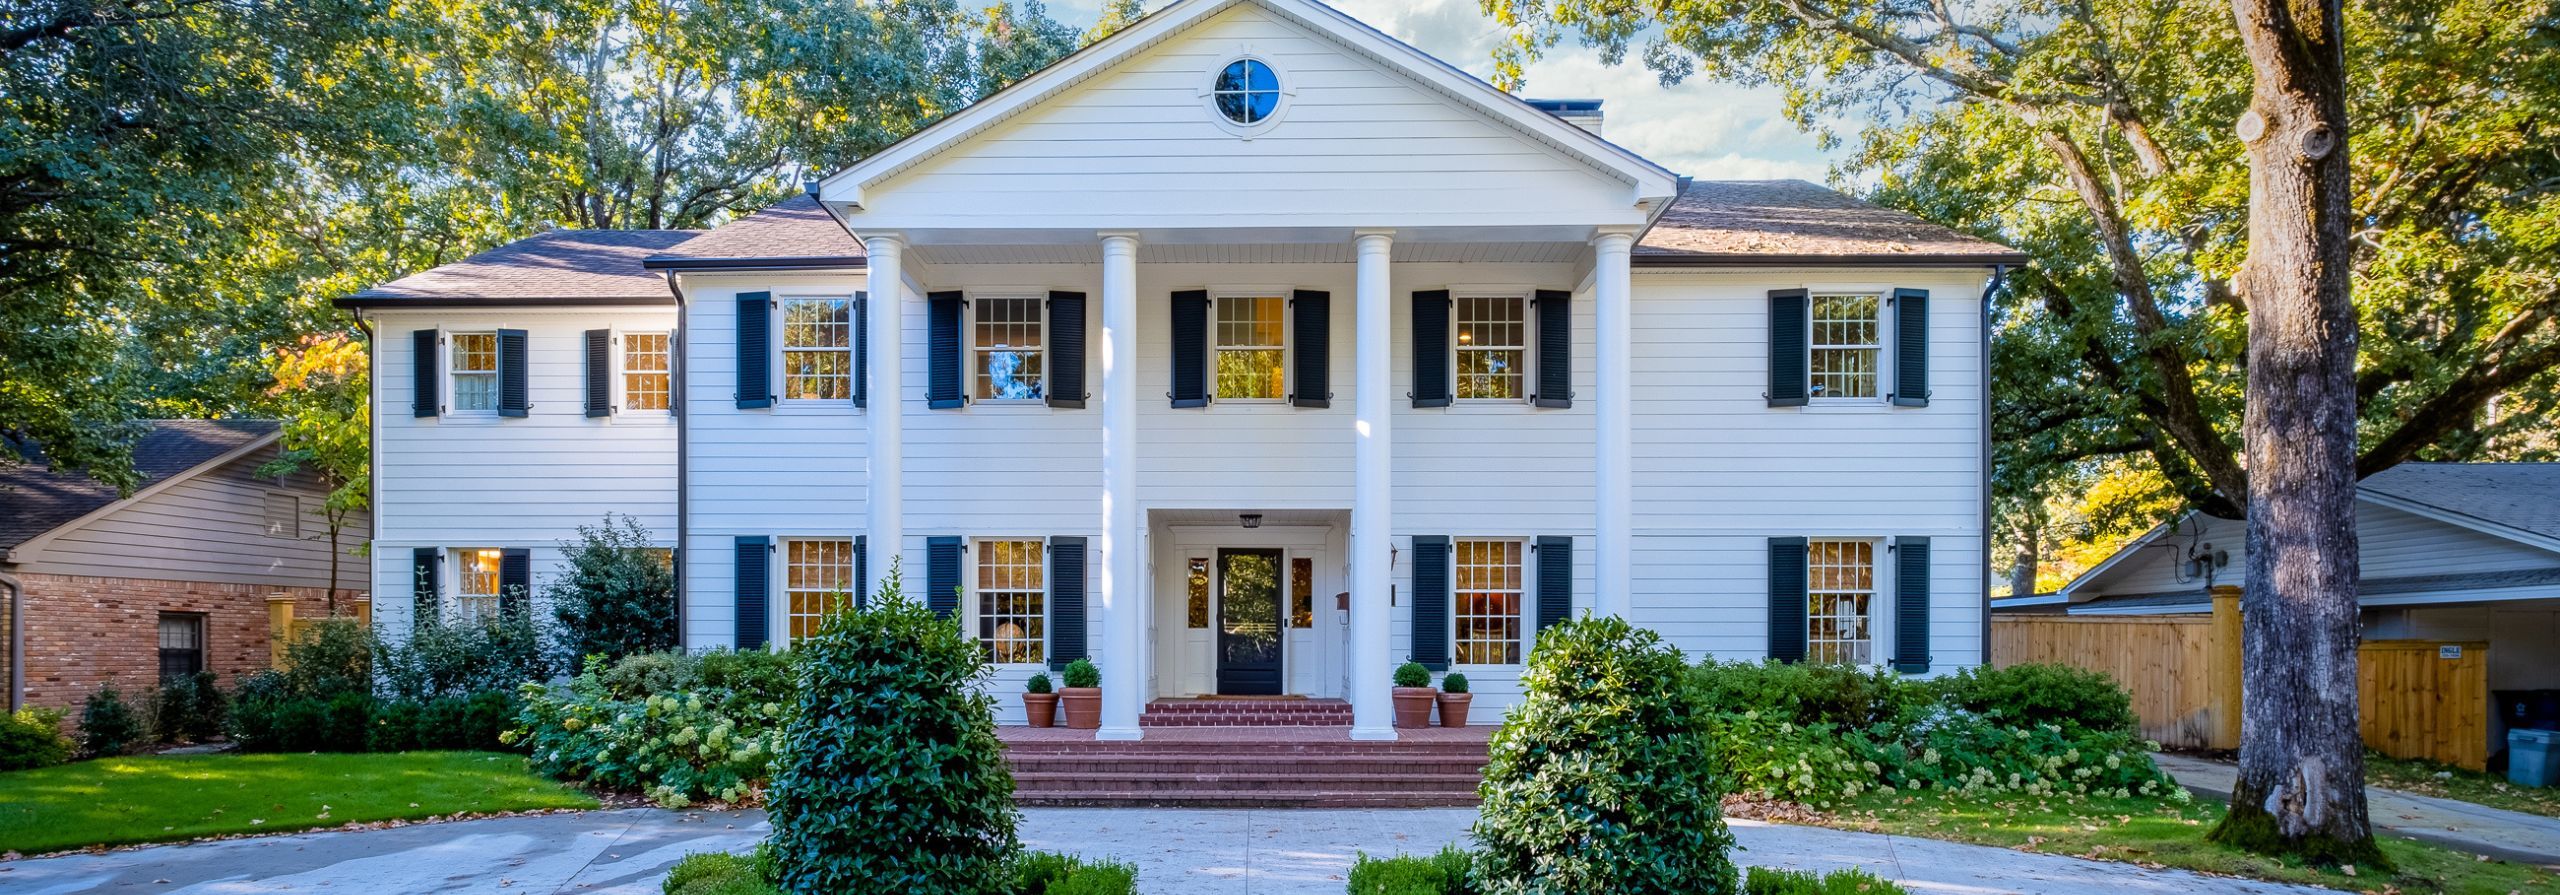 Large home with white columns in front standing tall